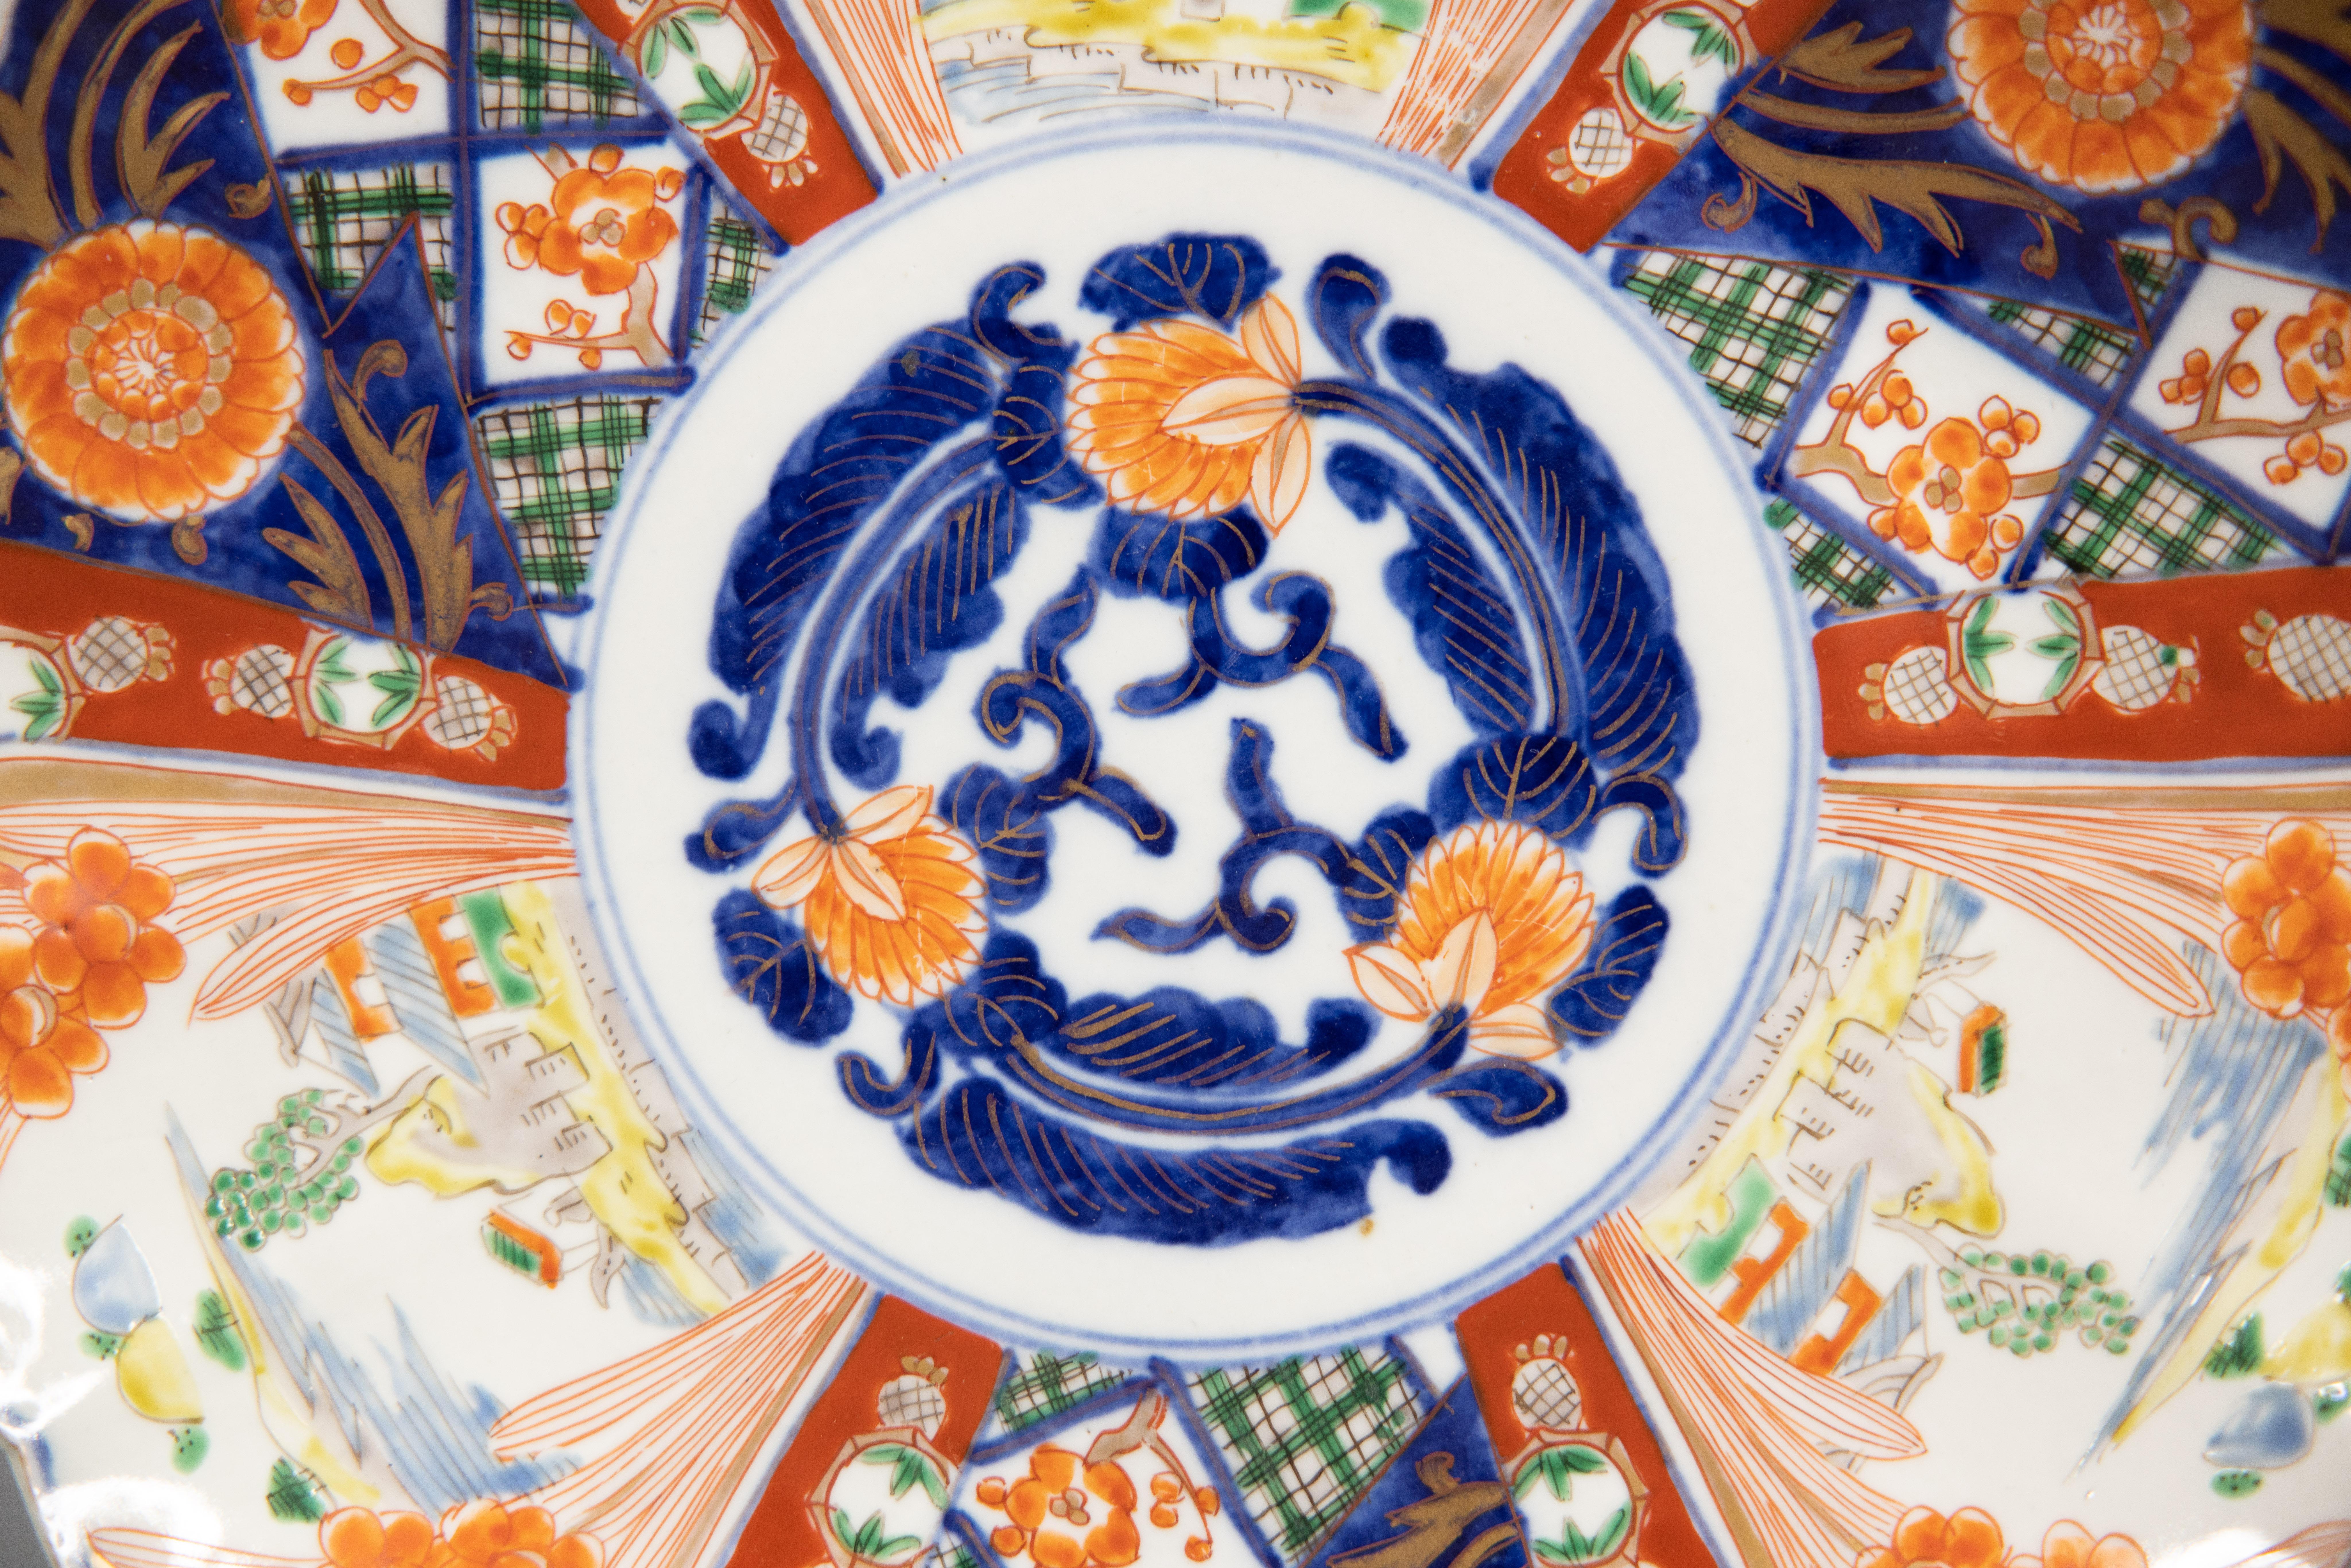 A gorgeous 19th-Century Japanese Imari porcelain charger with a hand painted floral design in the traditional Imari colors. This fine large plate has lovely scalloped edges and is quite heavy, weighing over 2 lbs. It's in excellent condition and